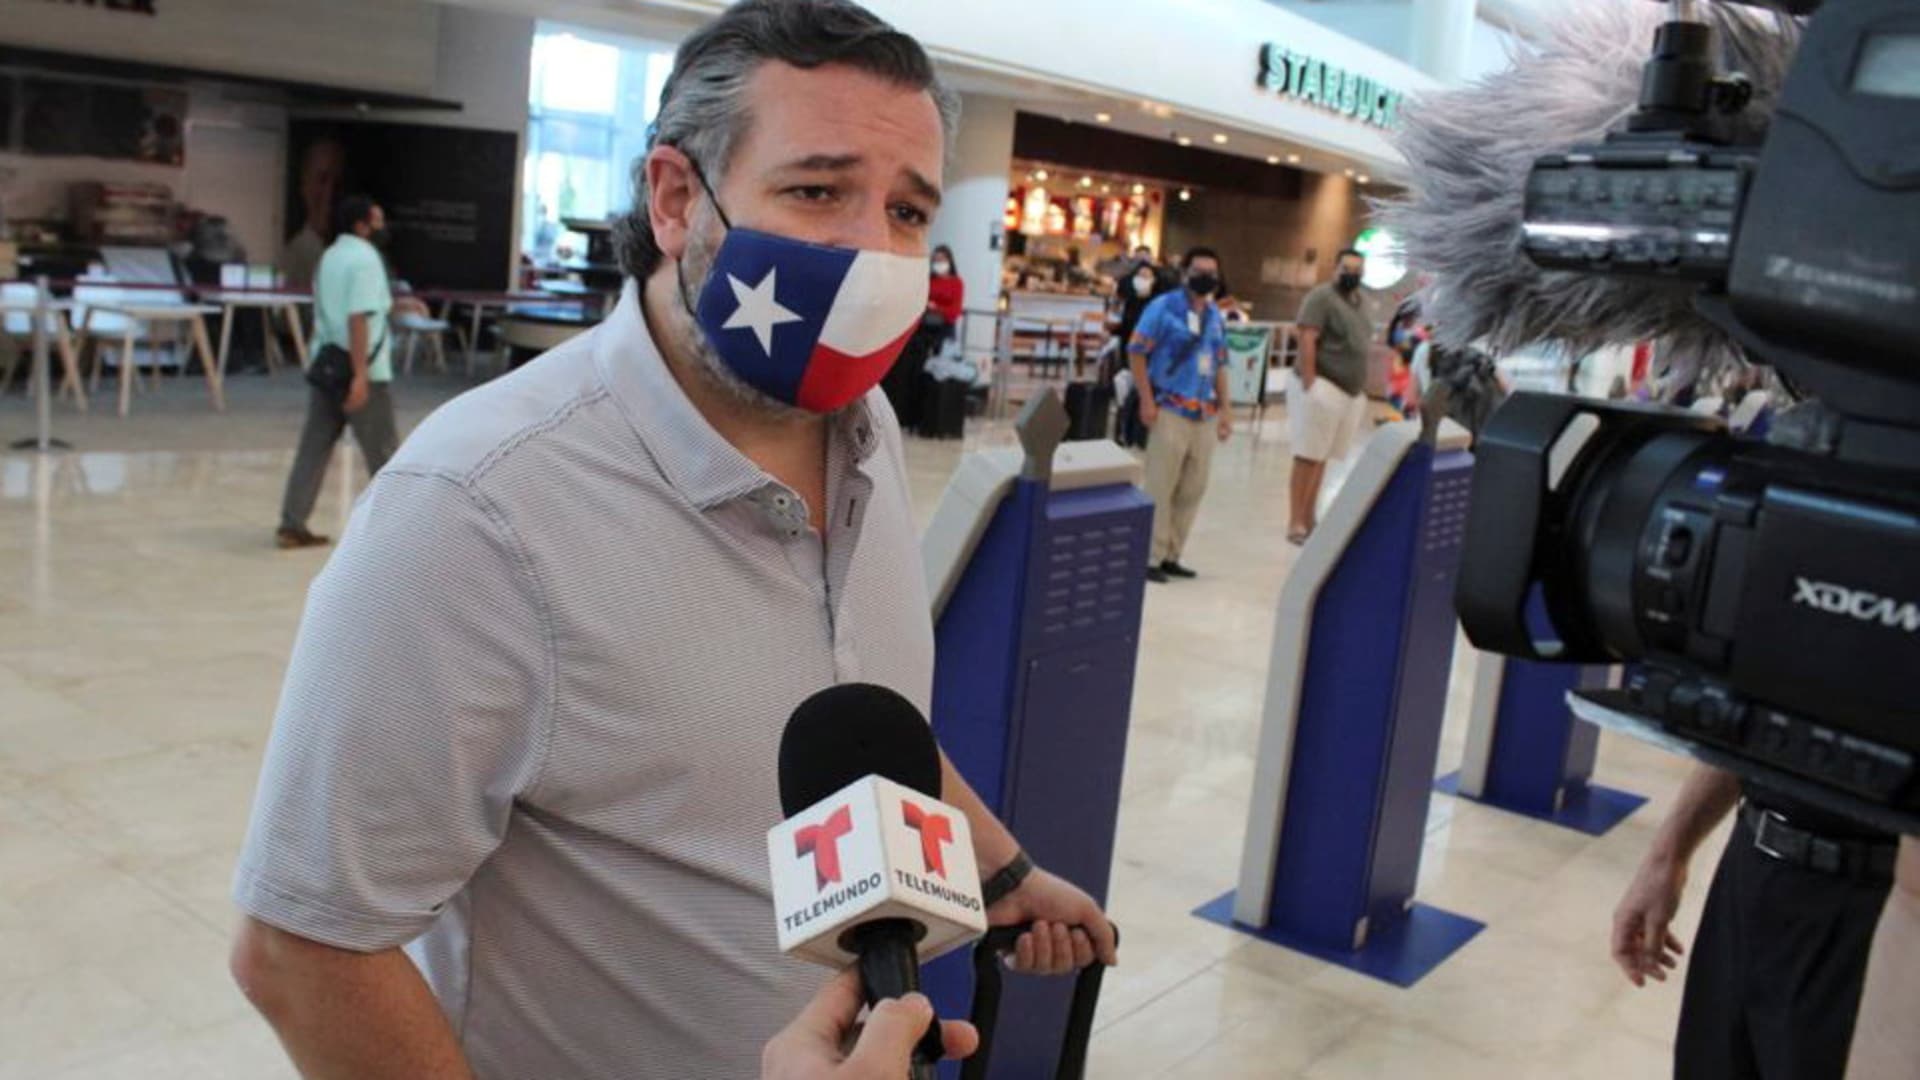 U.S. Senator Ted Cruz (R-TX) speaks to the media at the Cancun International Airport before boarding his plane back to the U.S., in Cancun, Mexico February 18, 2021.